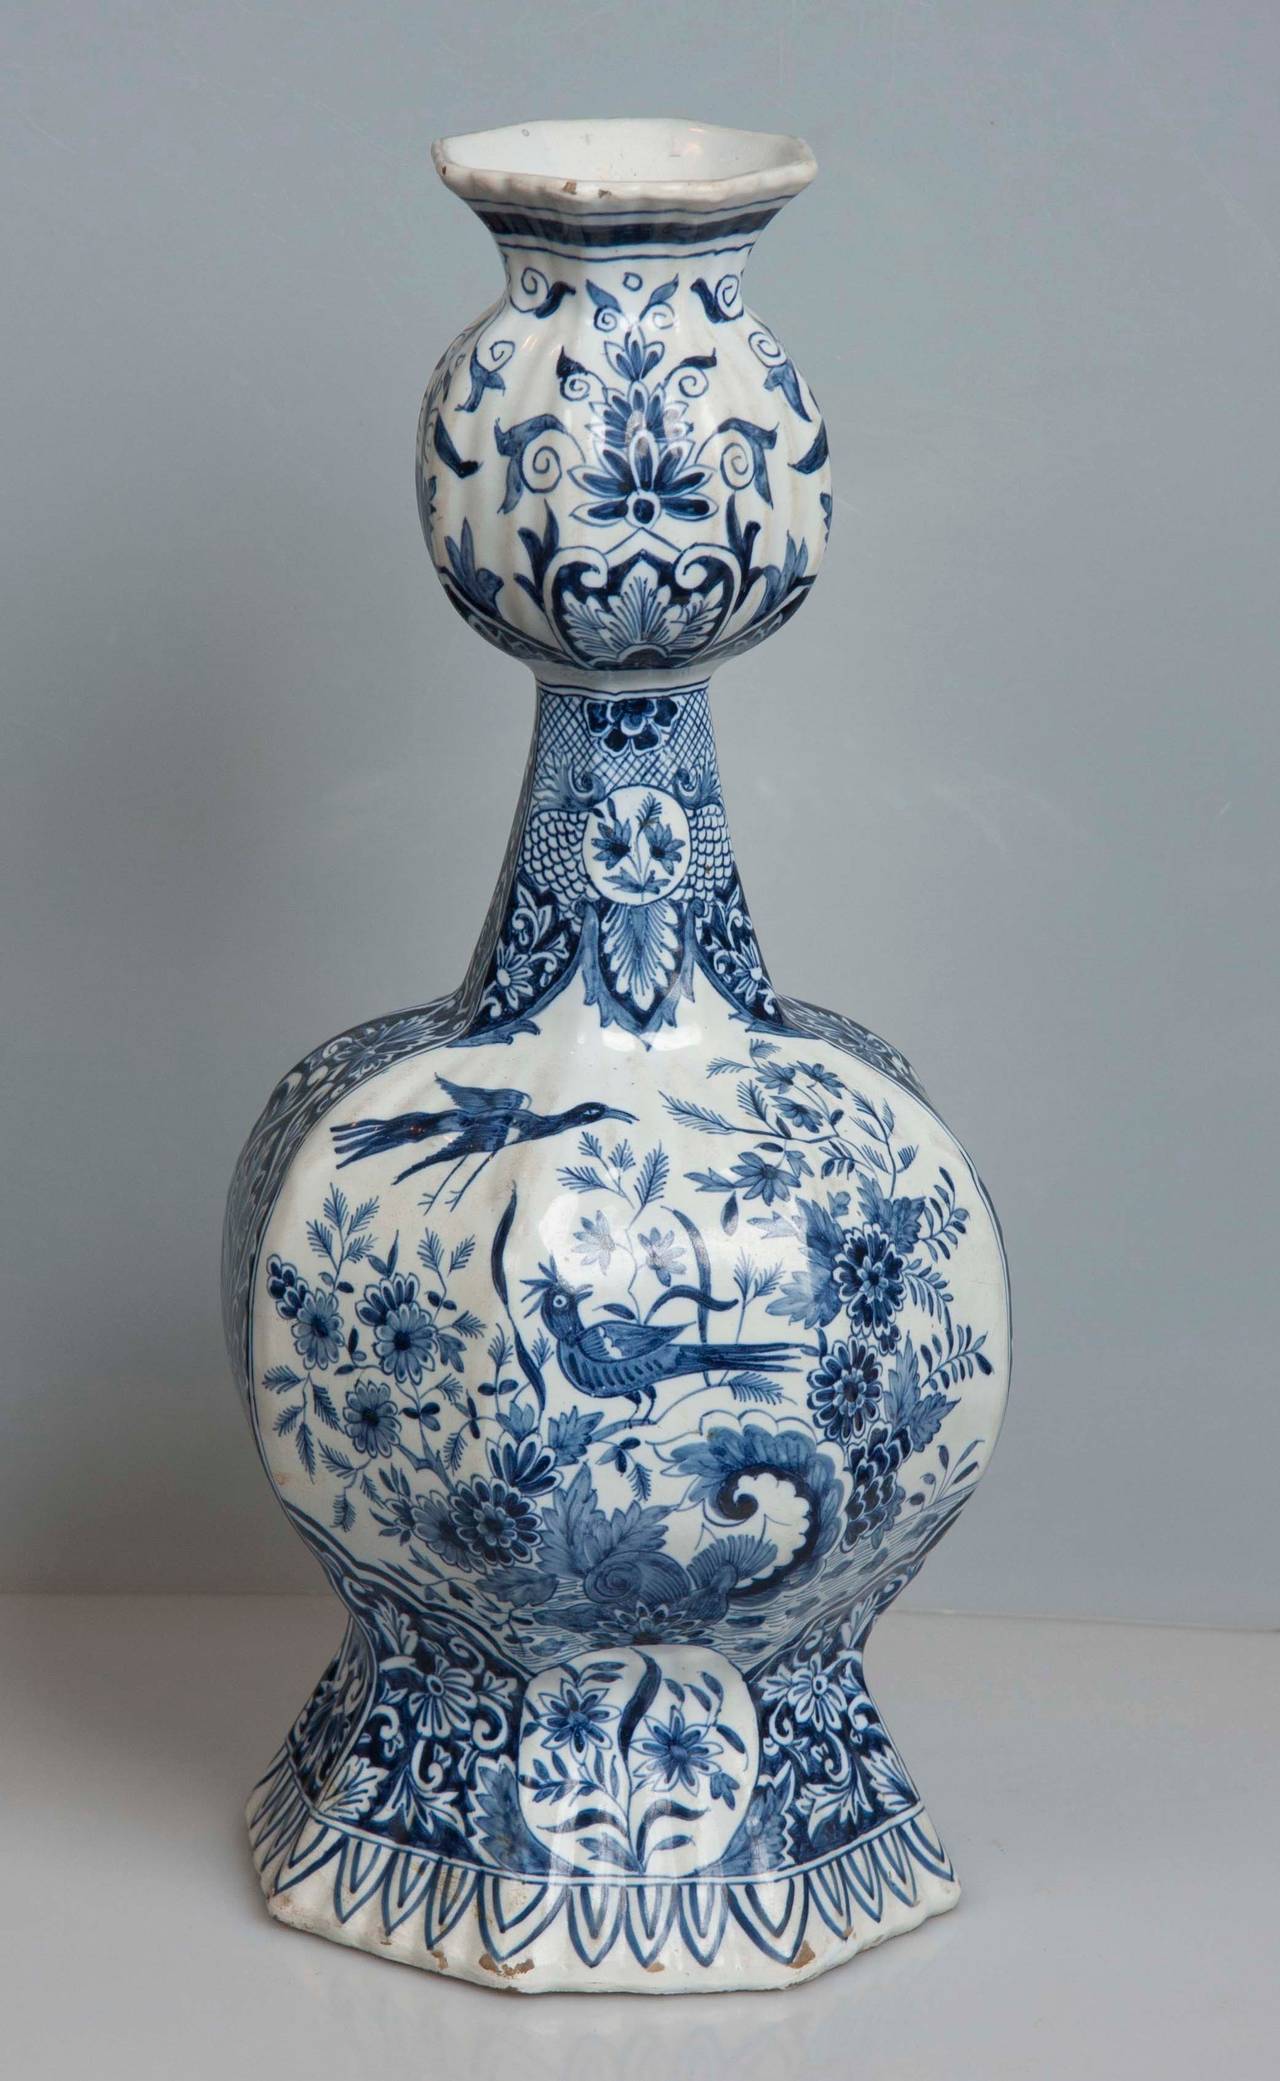 A pair of 19th century Dutch Delftware blue and white round form vases depicting scenes of birds and flowers.